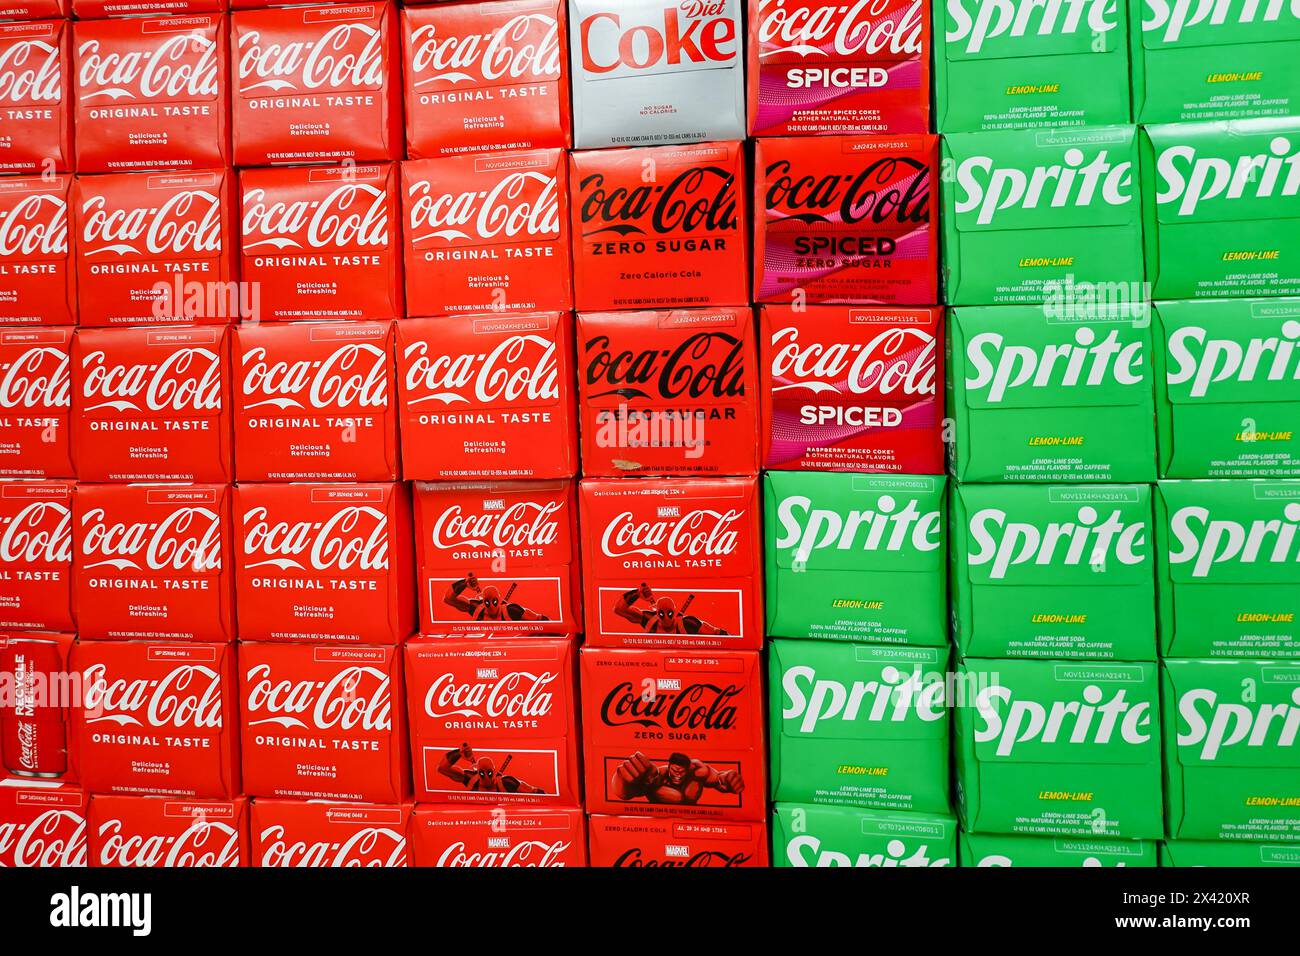 A grocery store display of 12 packs of assorted varieties of Coke and Sprite sodas Stock Photo